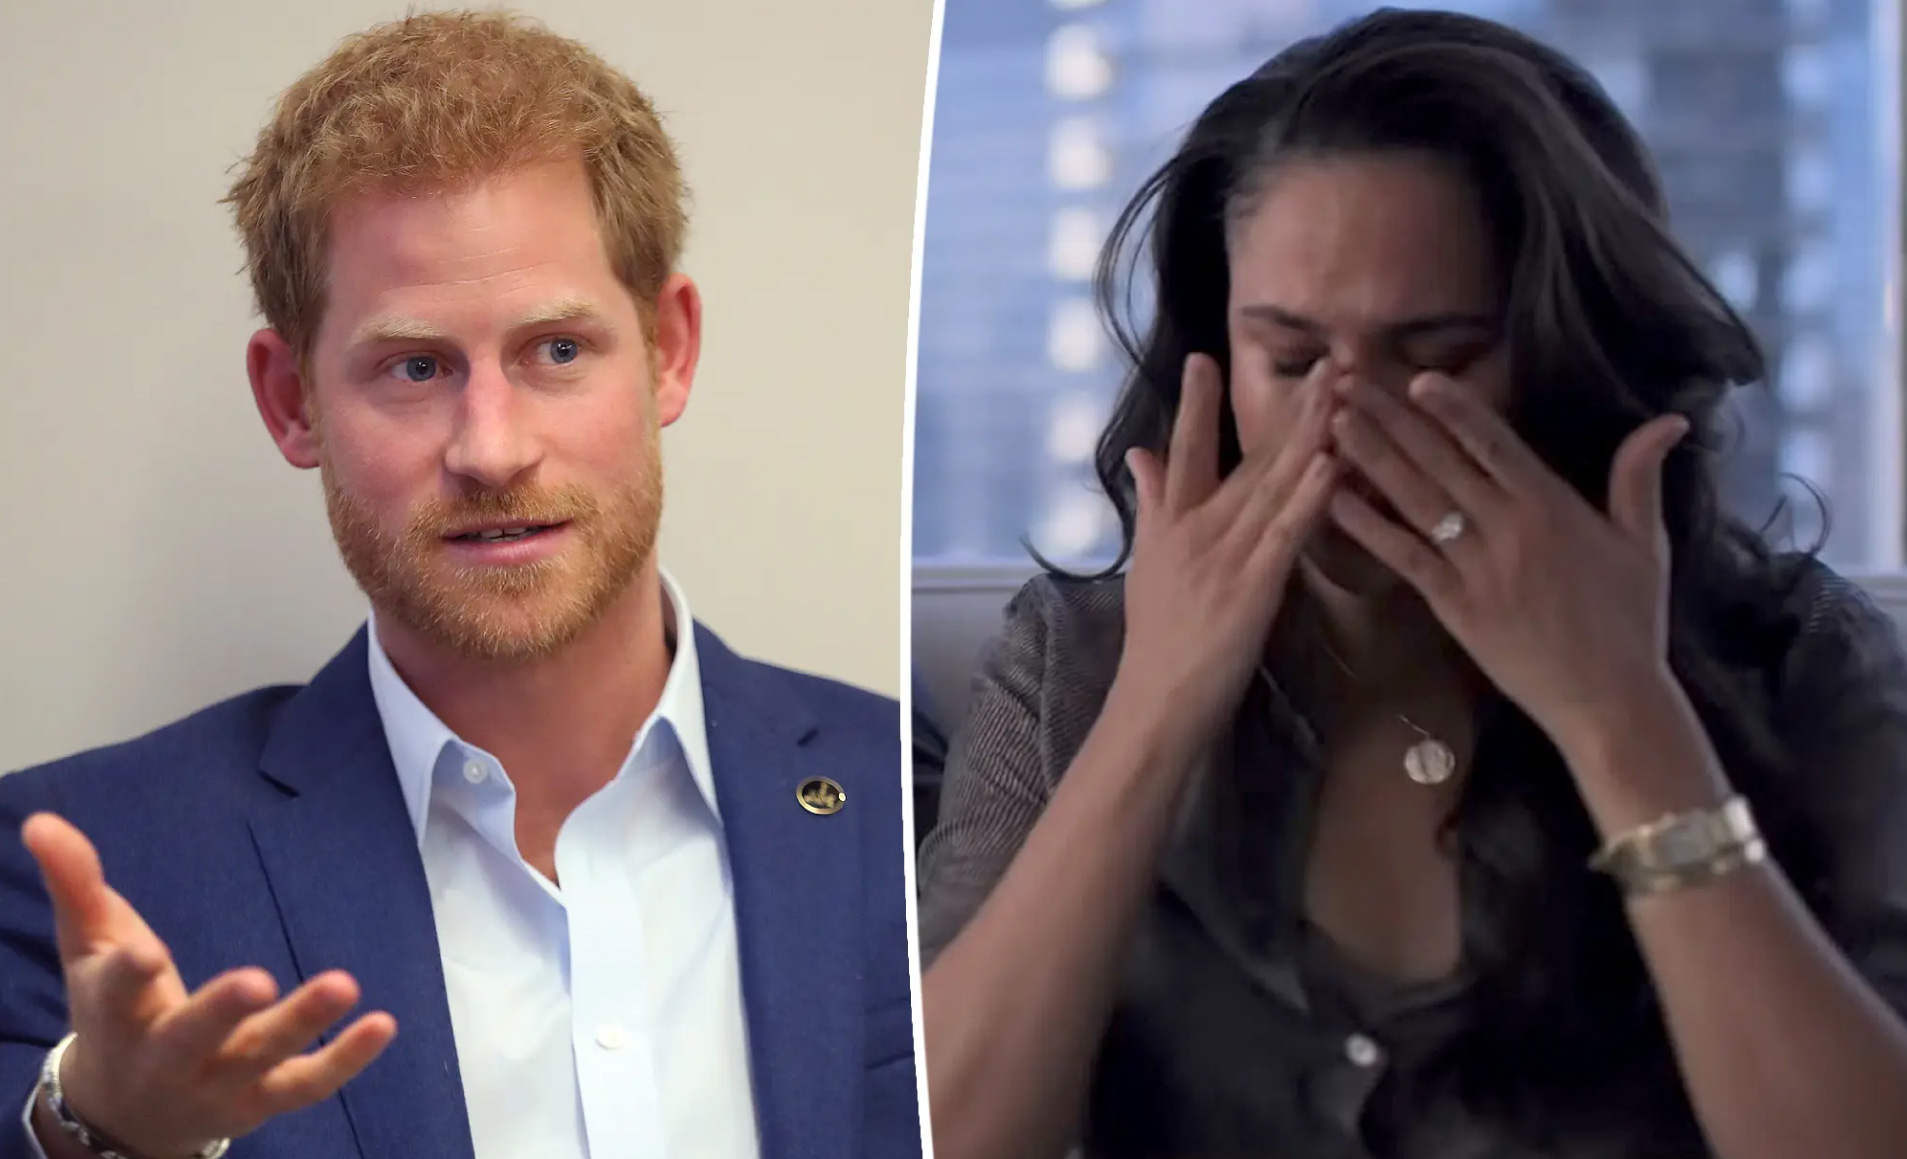 Harry and Meghan’s Fight: A Closer Look at Their Royal Struggle